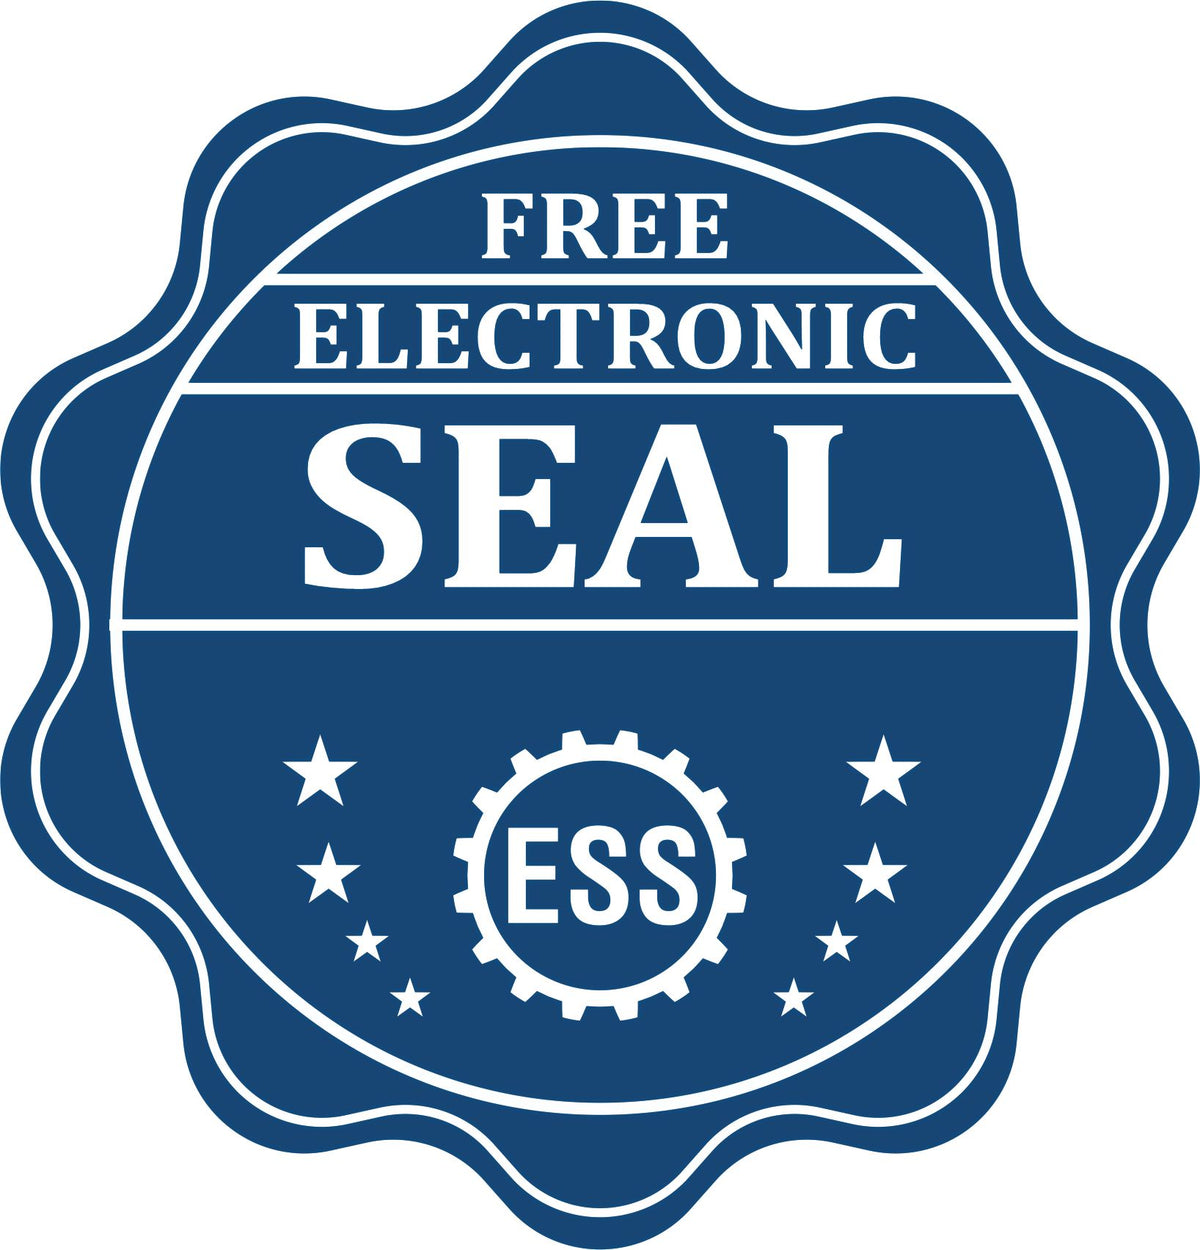 A badge showing a free electronic seal for the Soft South Carolina Professional Geologist Seal with stars and the ESS gear on the emblem.